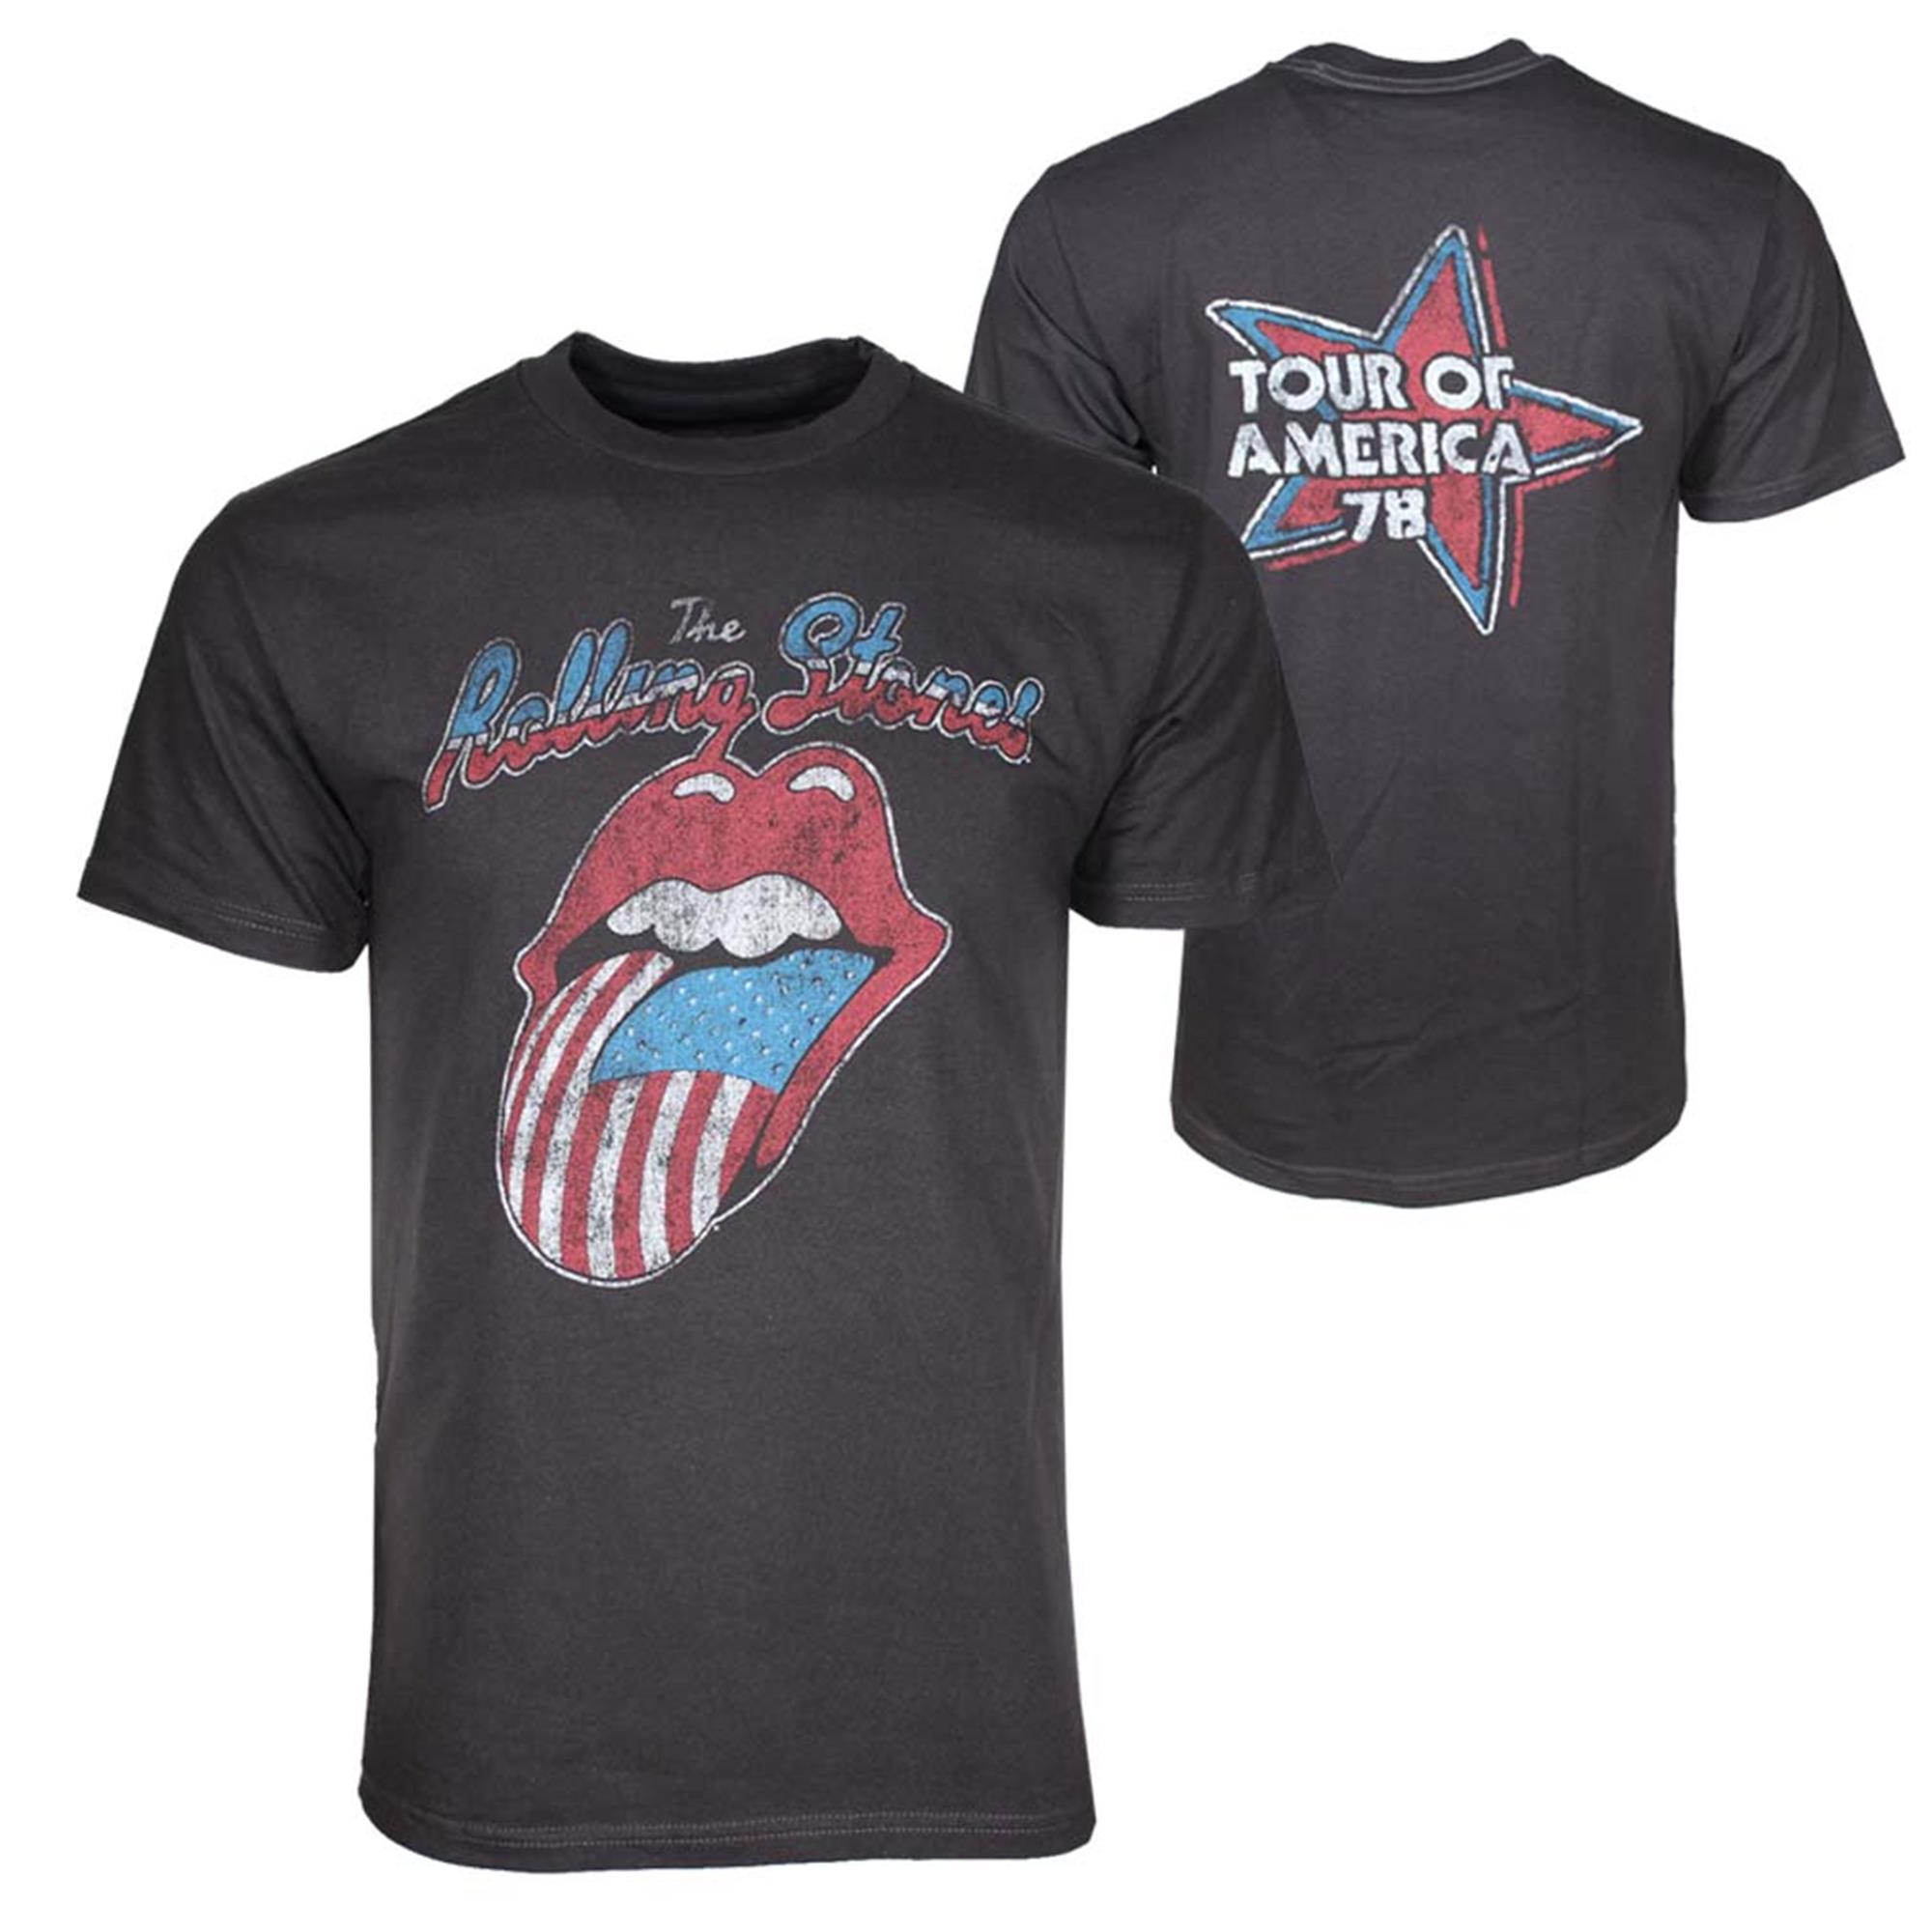 Rolling Stones Tour of America T-Shirt